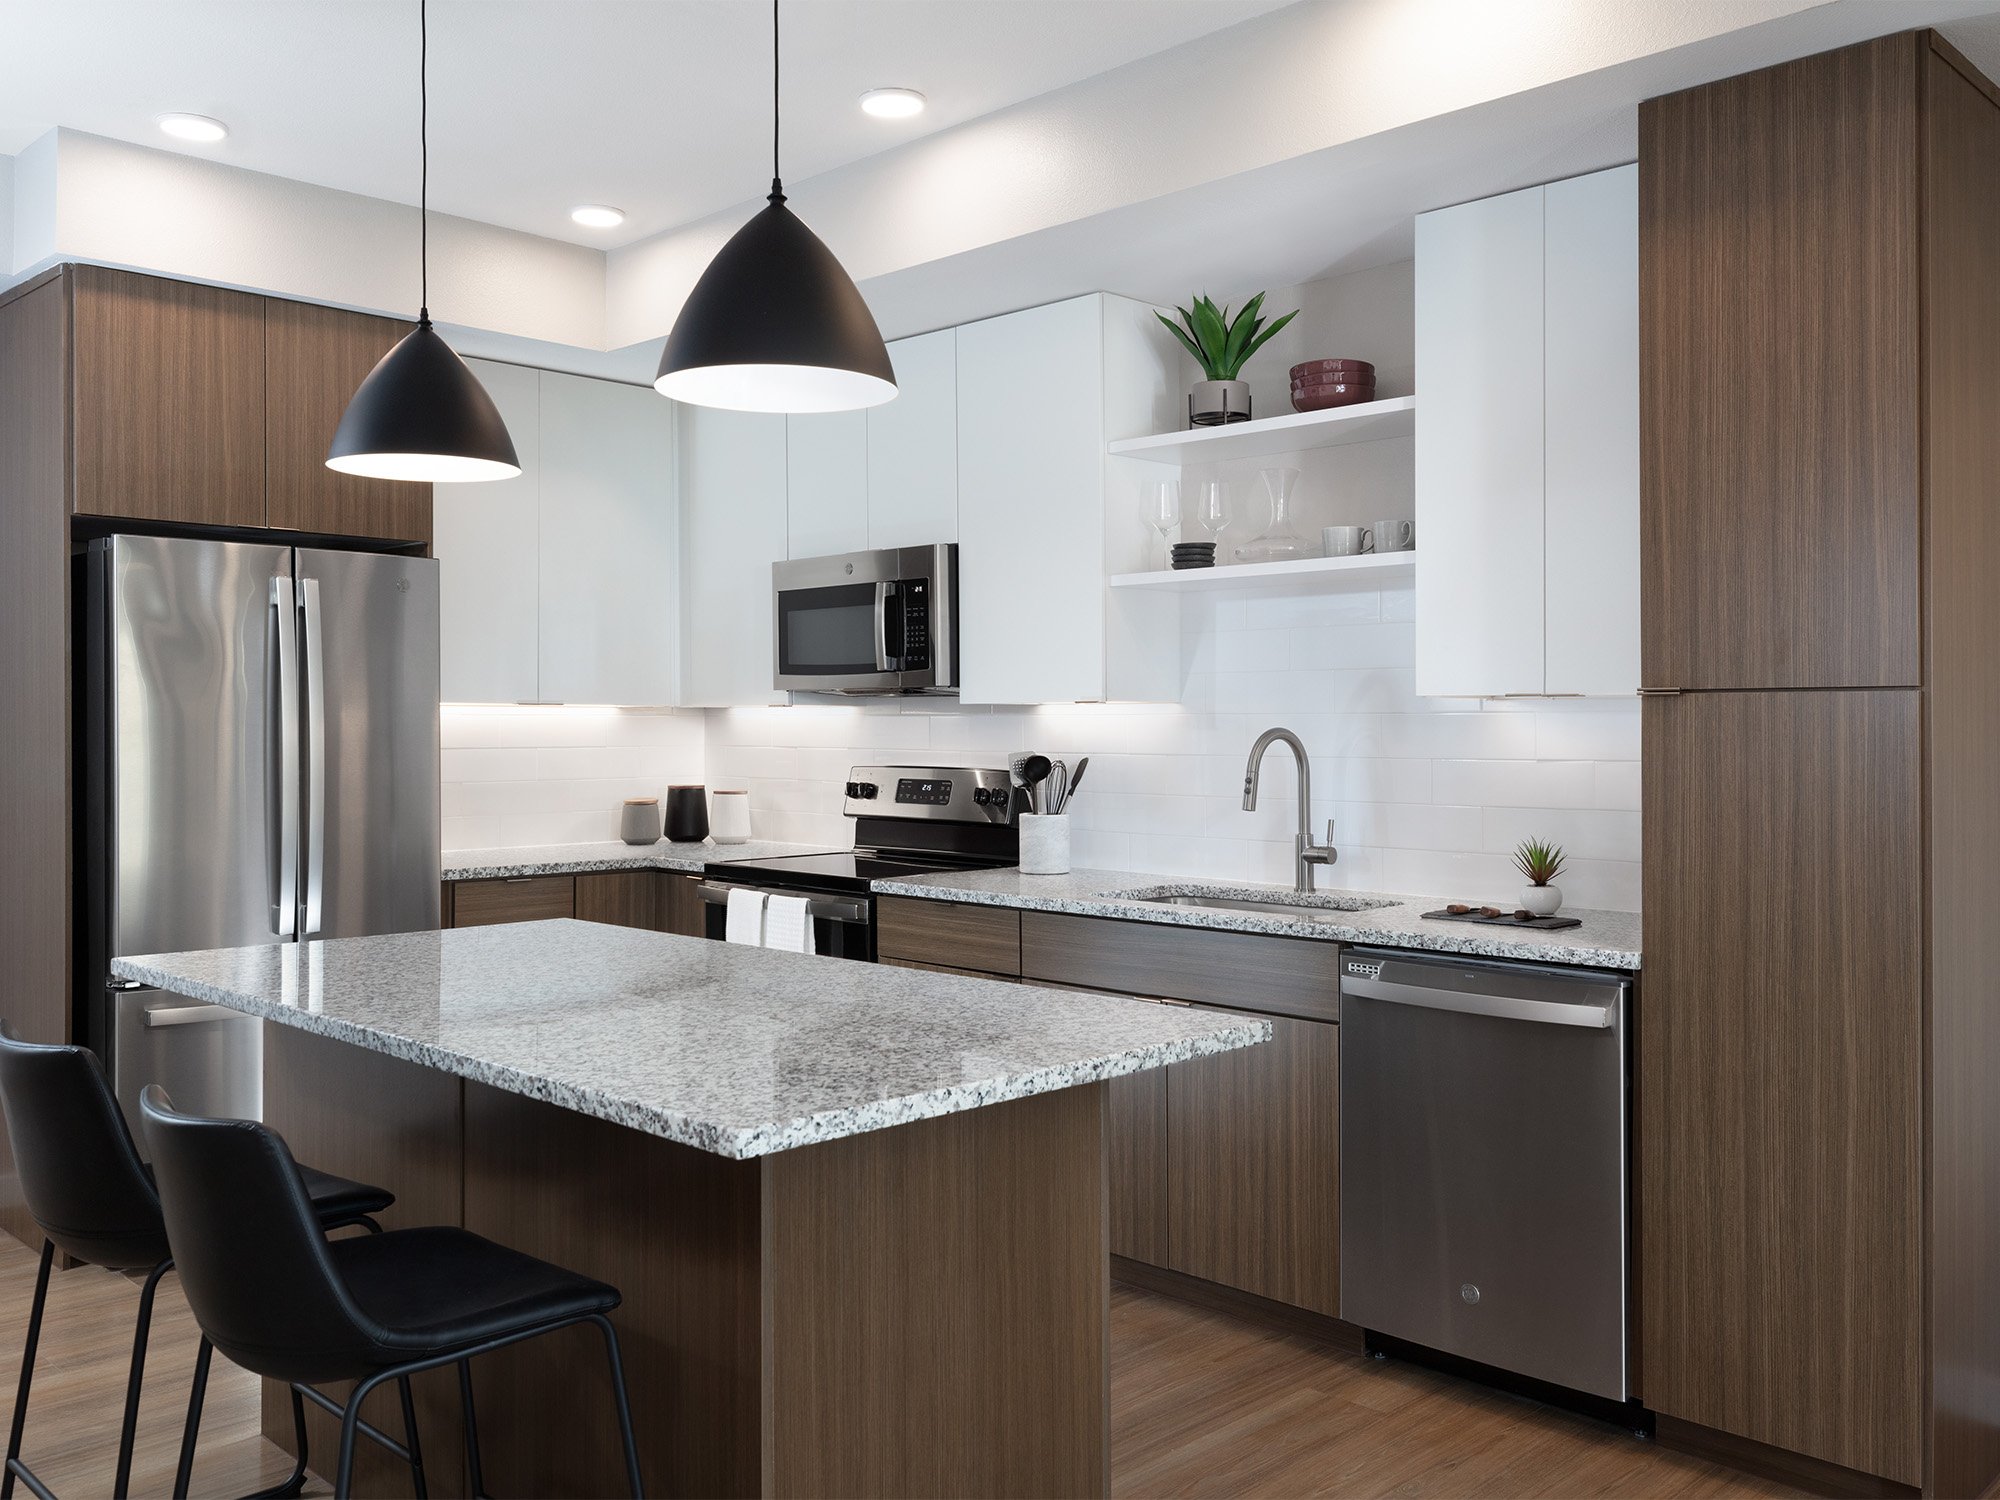 Kitchen with white and light wood cabinets, island with quartz countertop and black leather barstools, stainless steel appliances, and views into living room